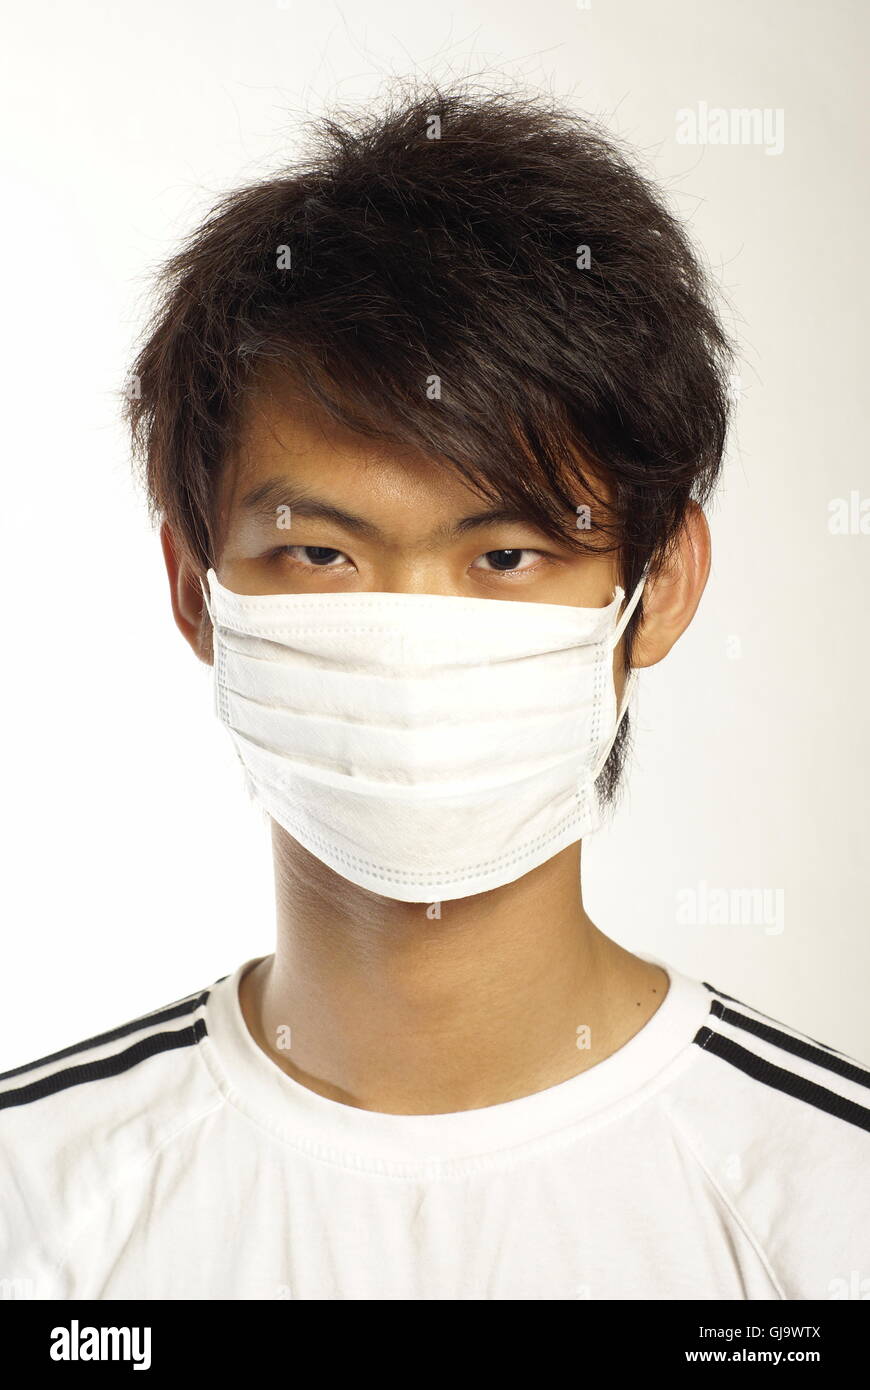 Asian man in surgical mask Stock Photo